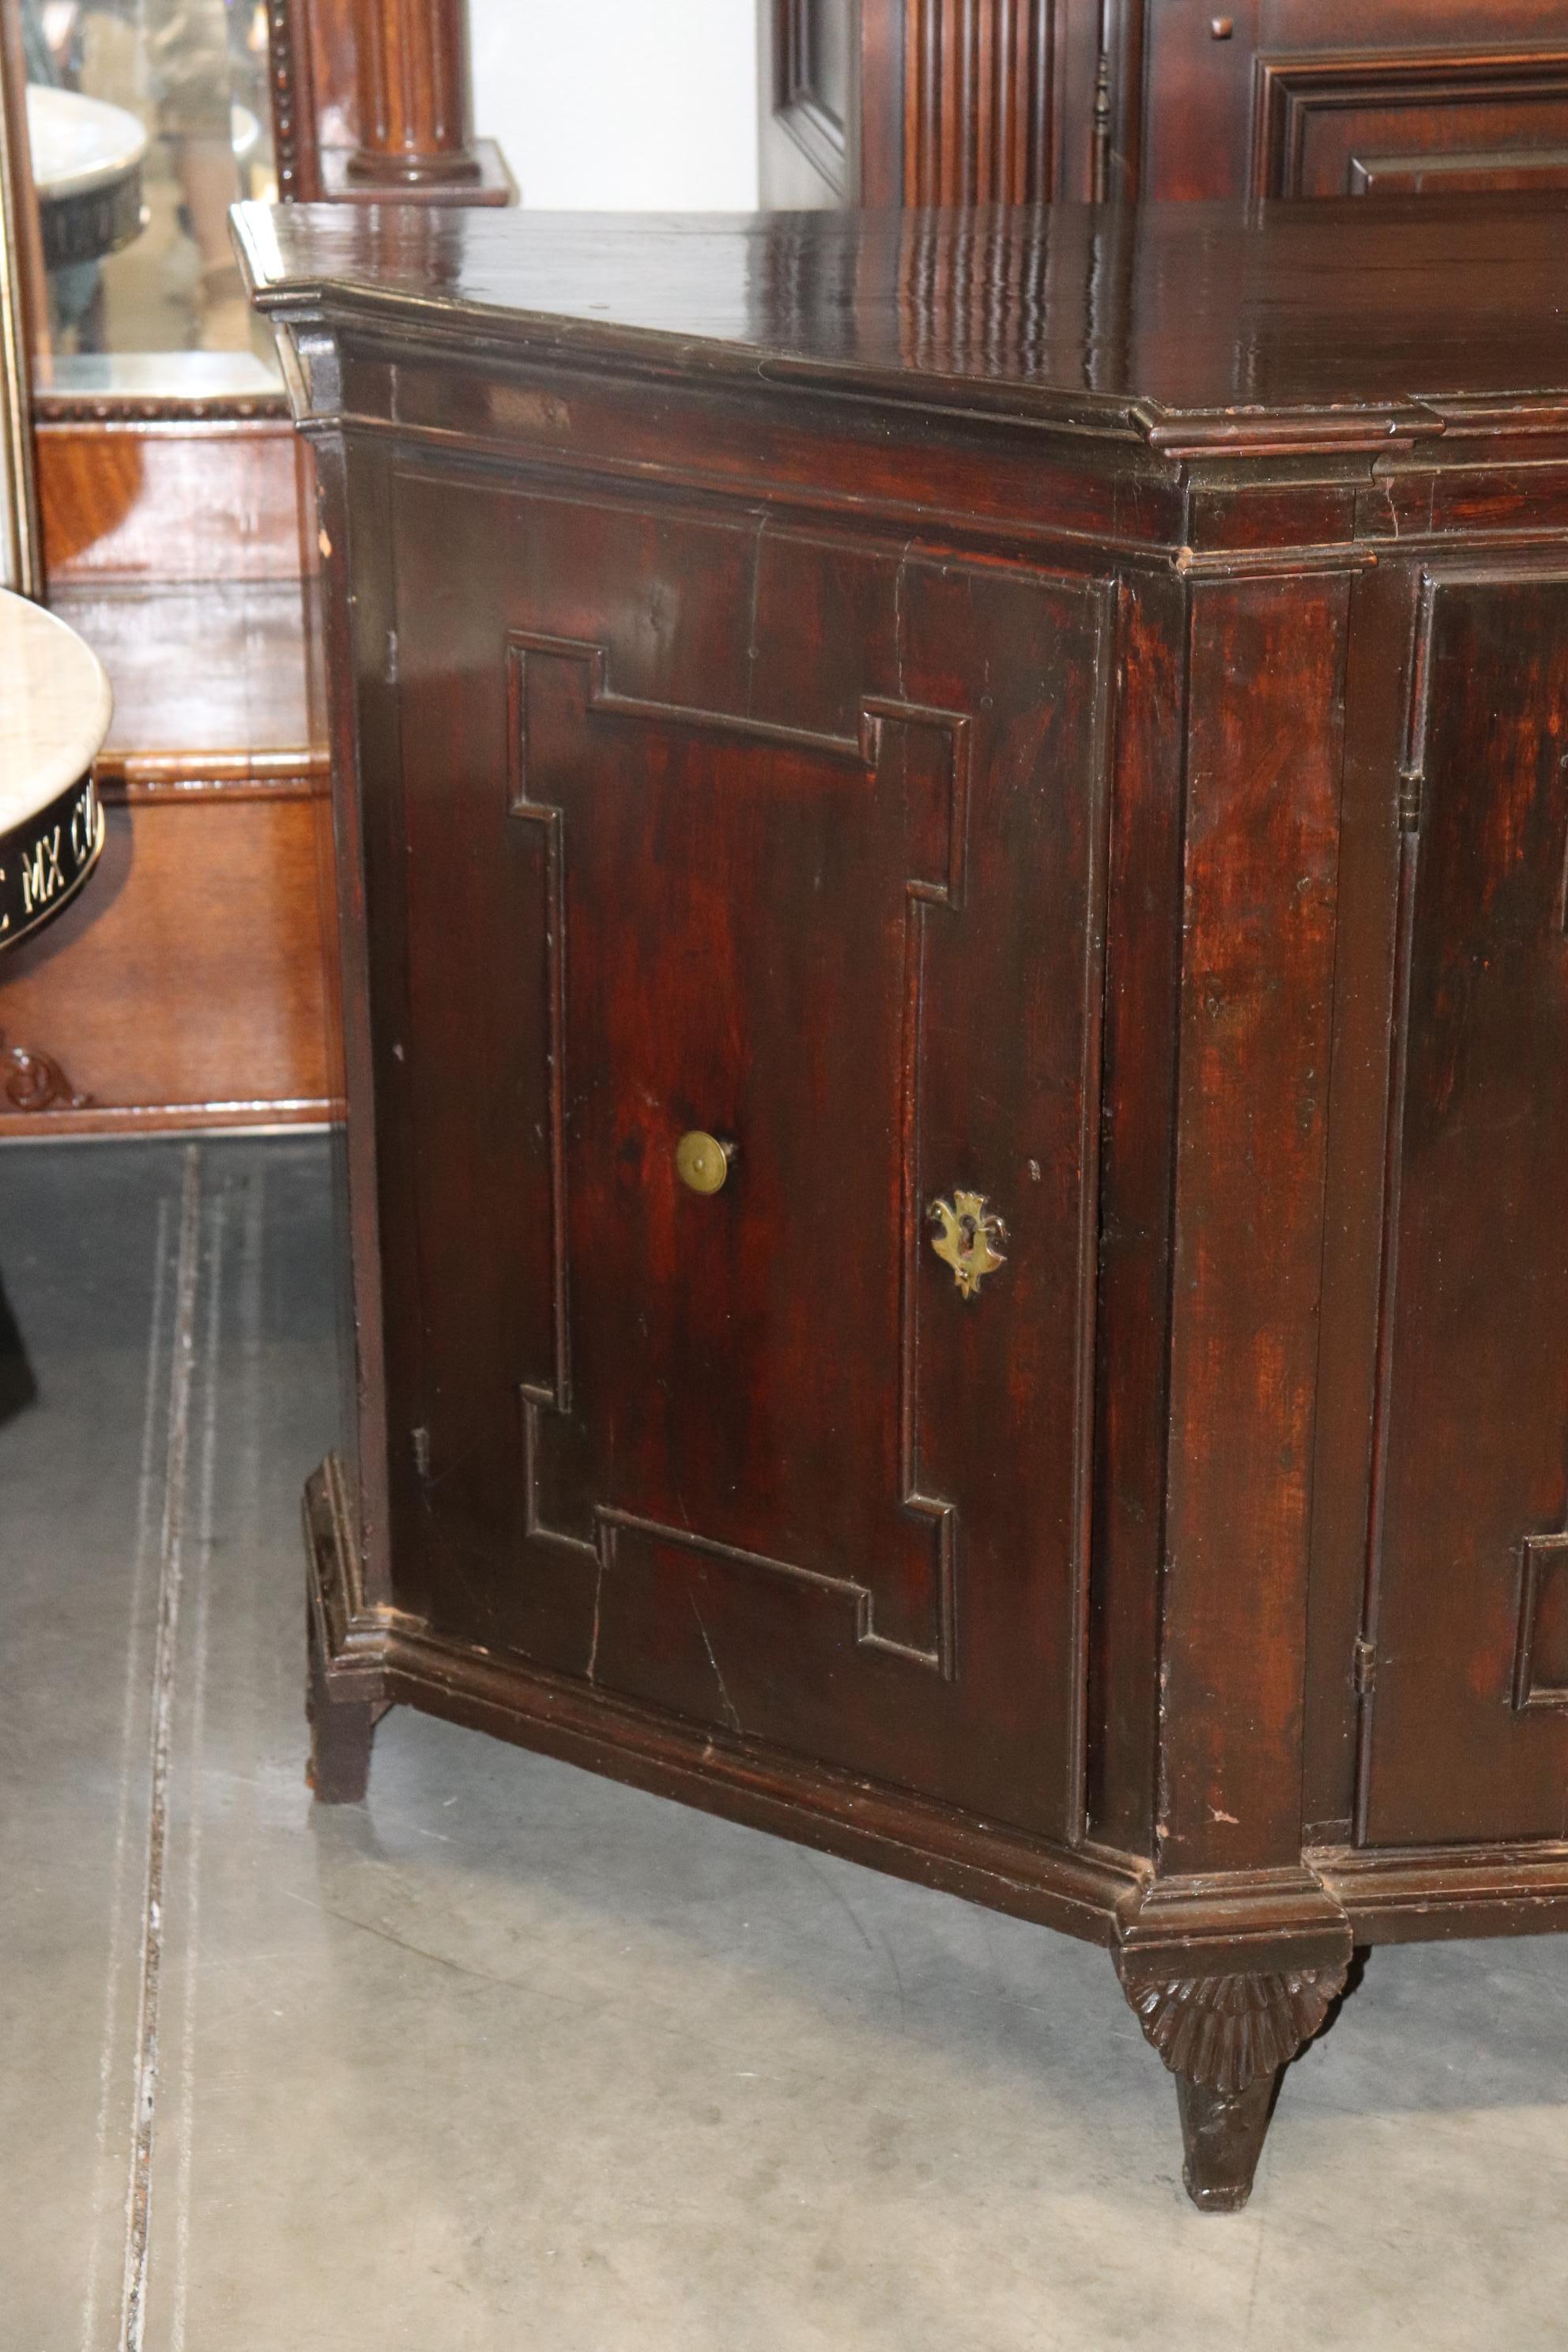 Rare Period French 1790s era Directoire Mahogany Sideboard Buffet In Good Condition For Sale In Swedesboro, NJ